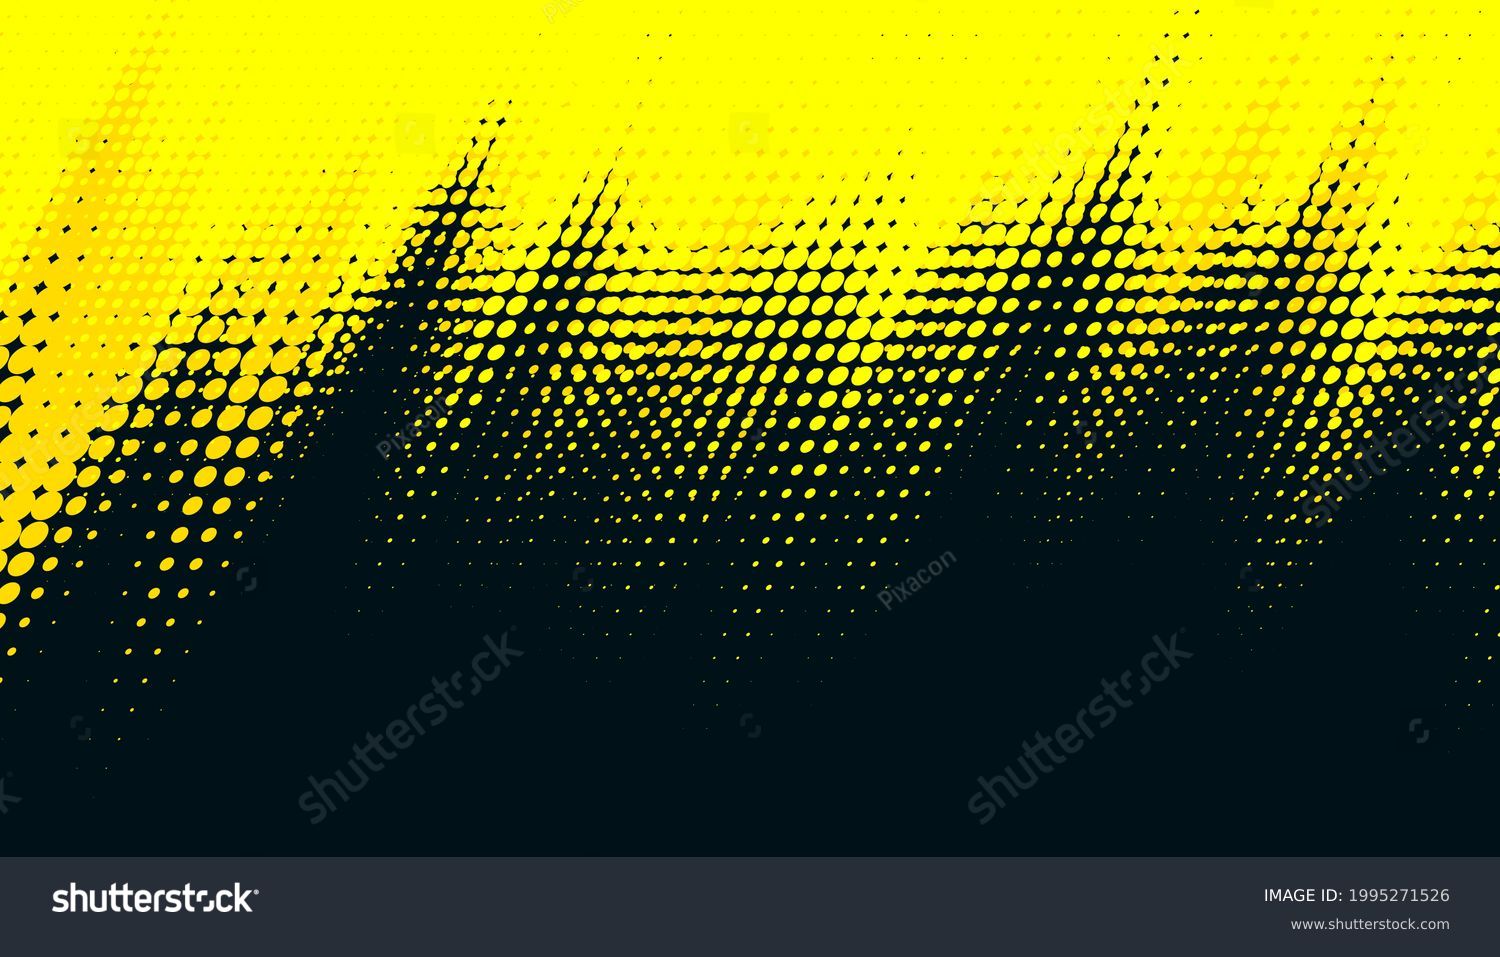 Dots halftone yellow and dark blue color pattern gradient grunge texture background. Dots pop art sport style vector illustration. #1995271526